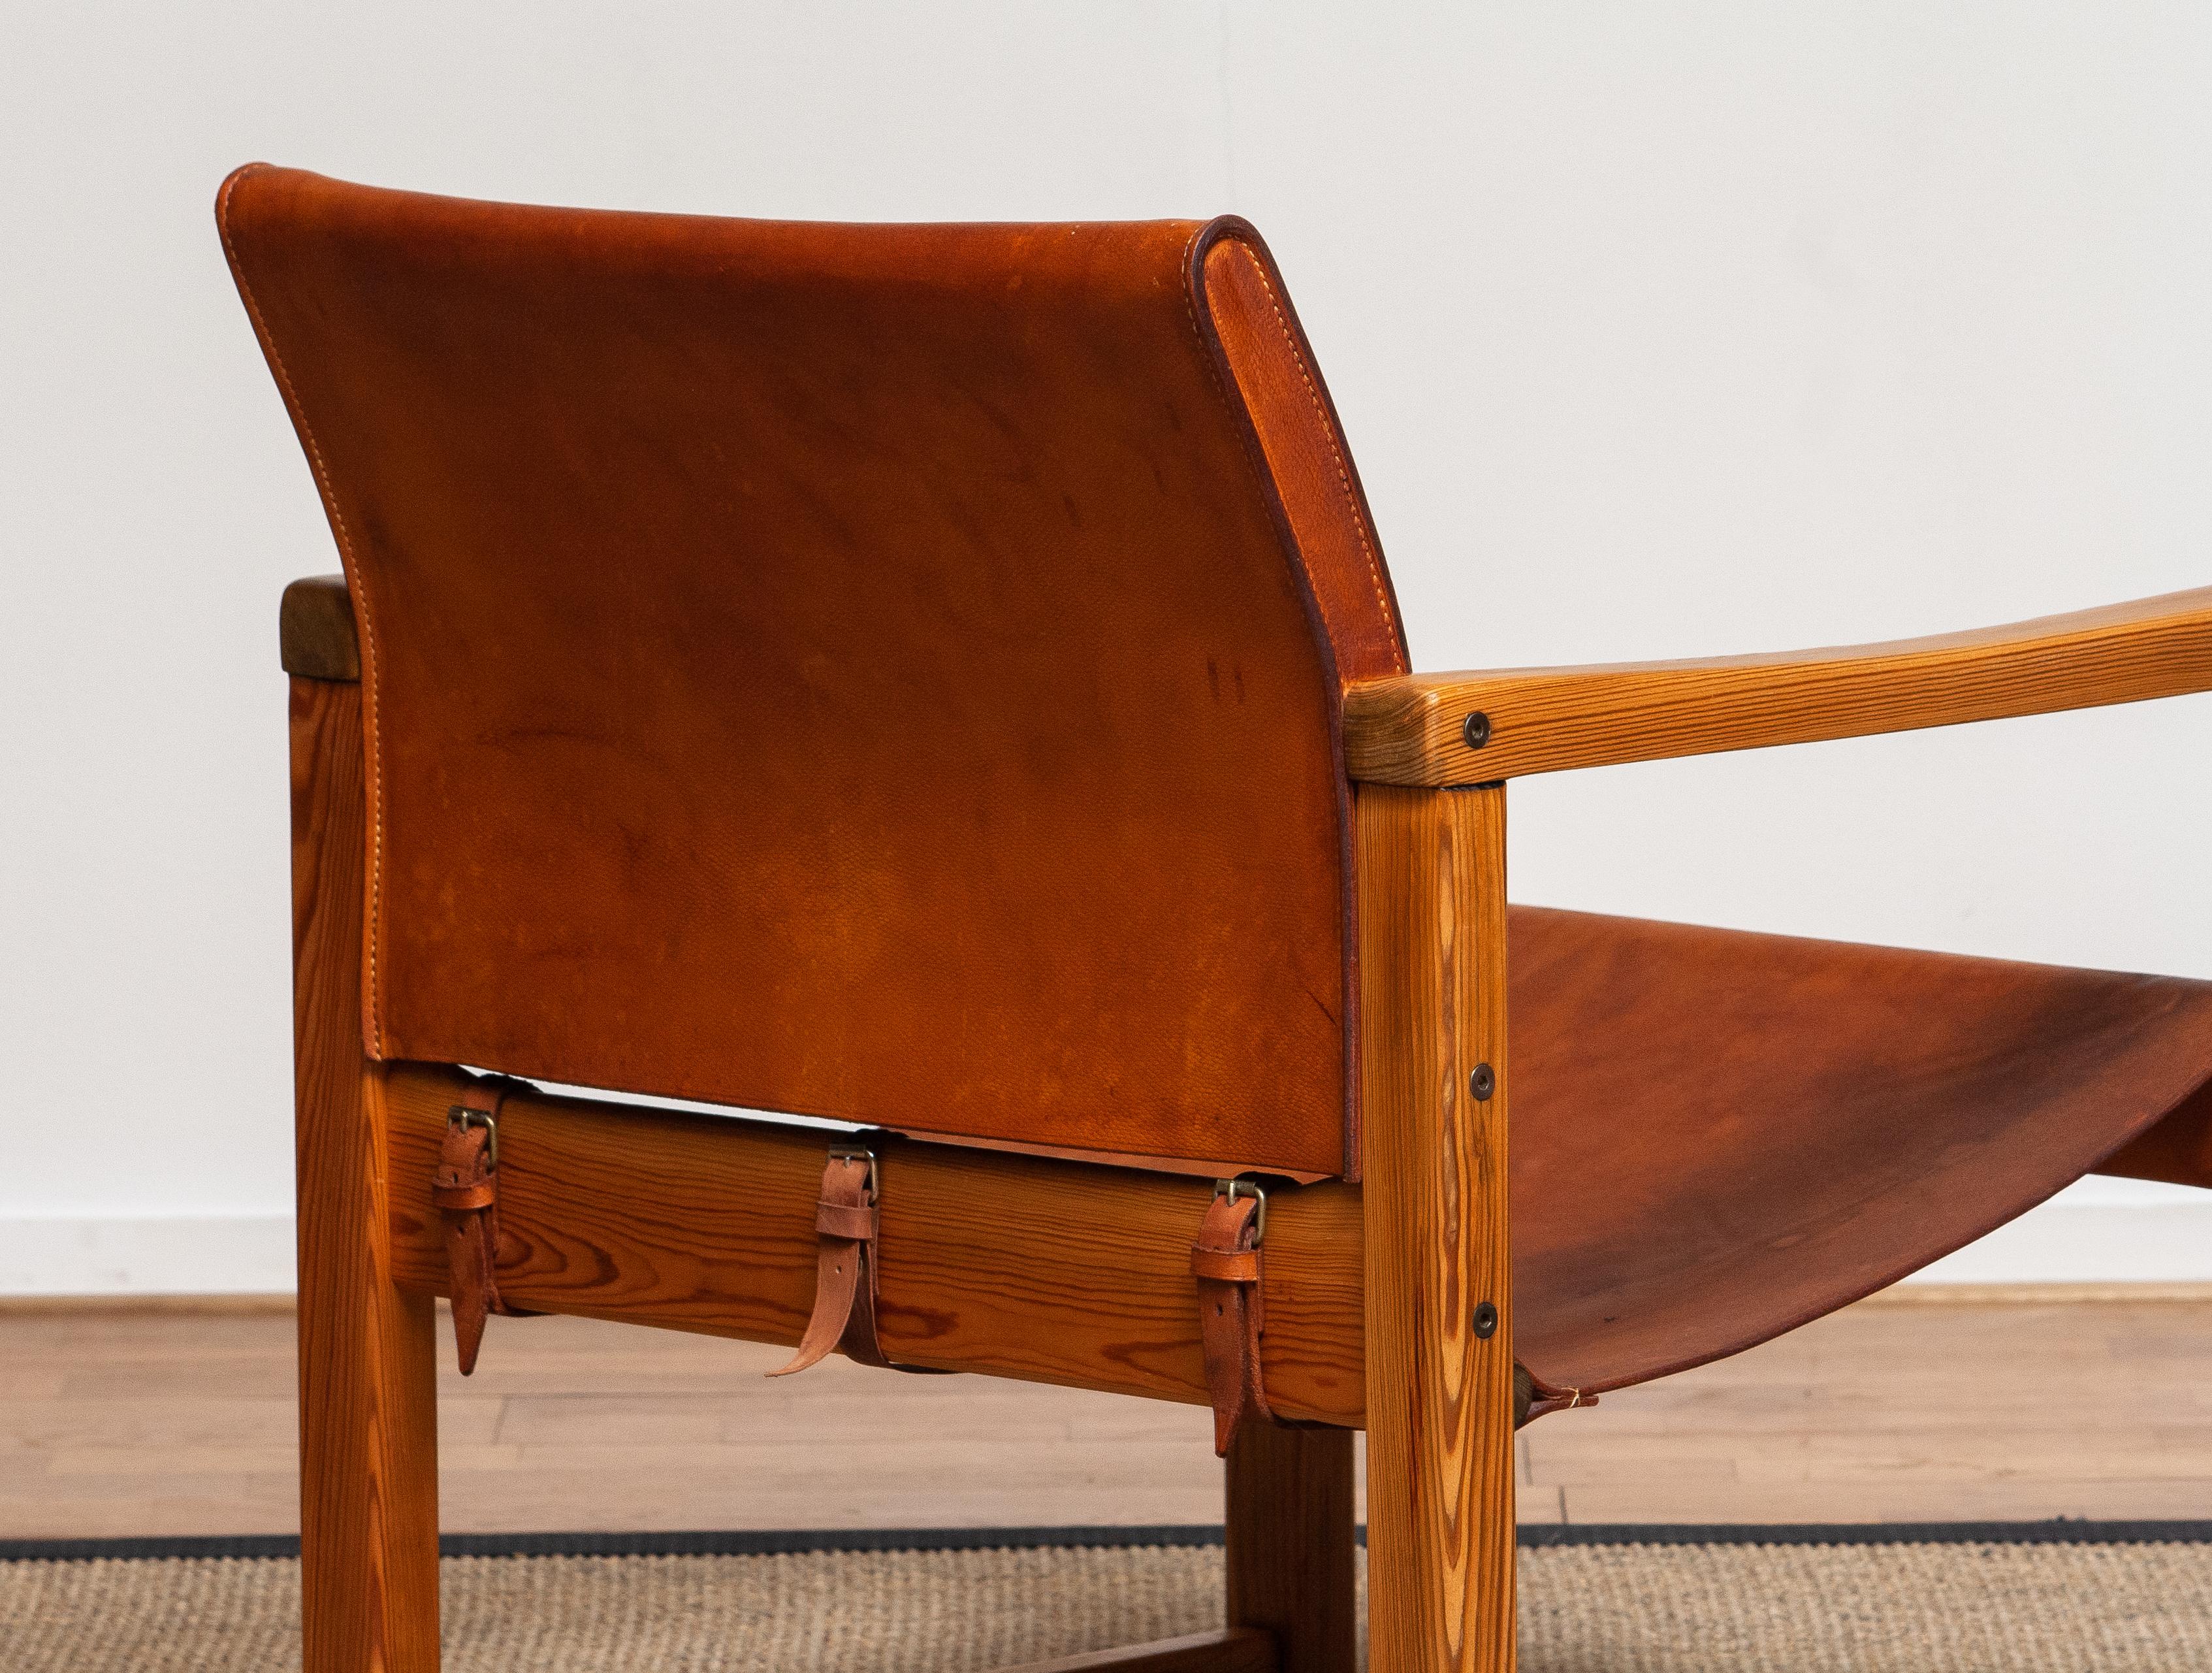 Pine Cognac Leather Karin Mobring Safari Chair Model Diana by Ikea in Sweden, 1970s